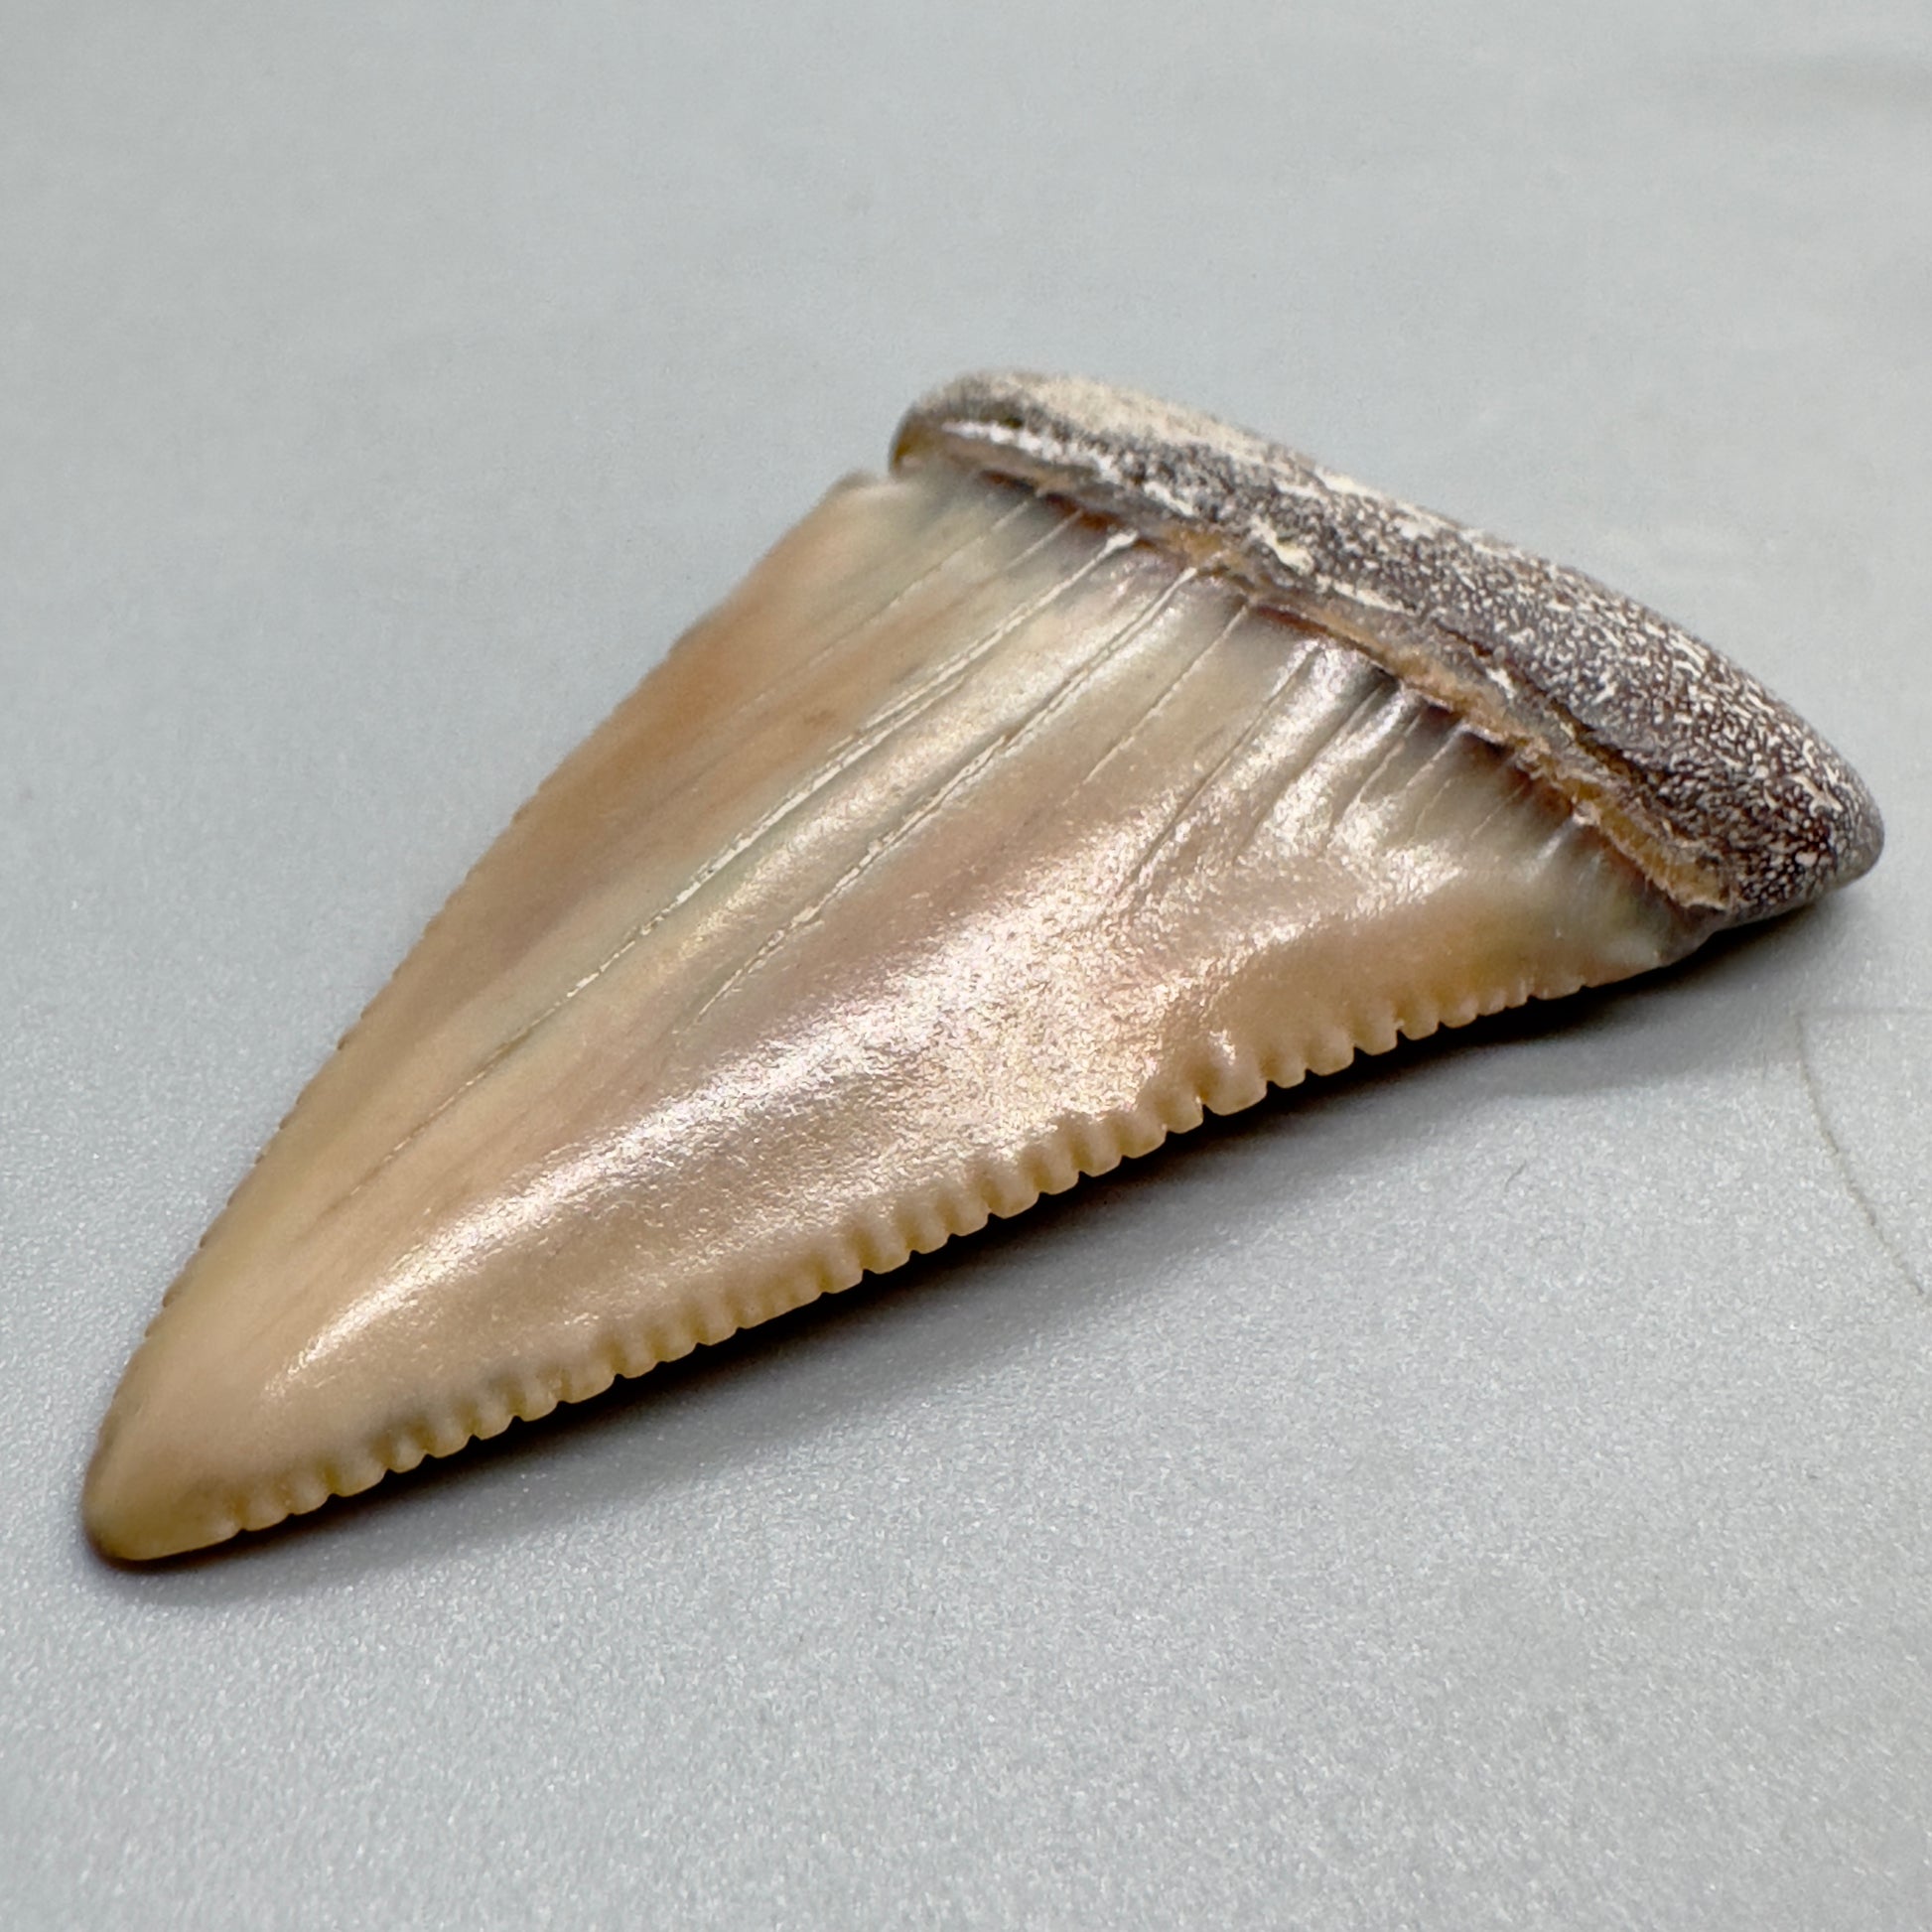 Cream and orange great white shark tooth 2.16 inch Peru GW4 front right